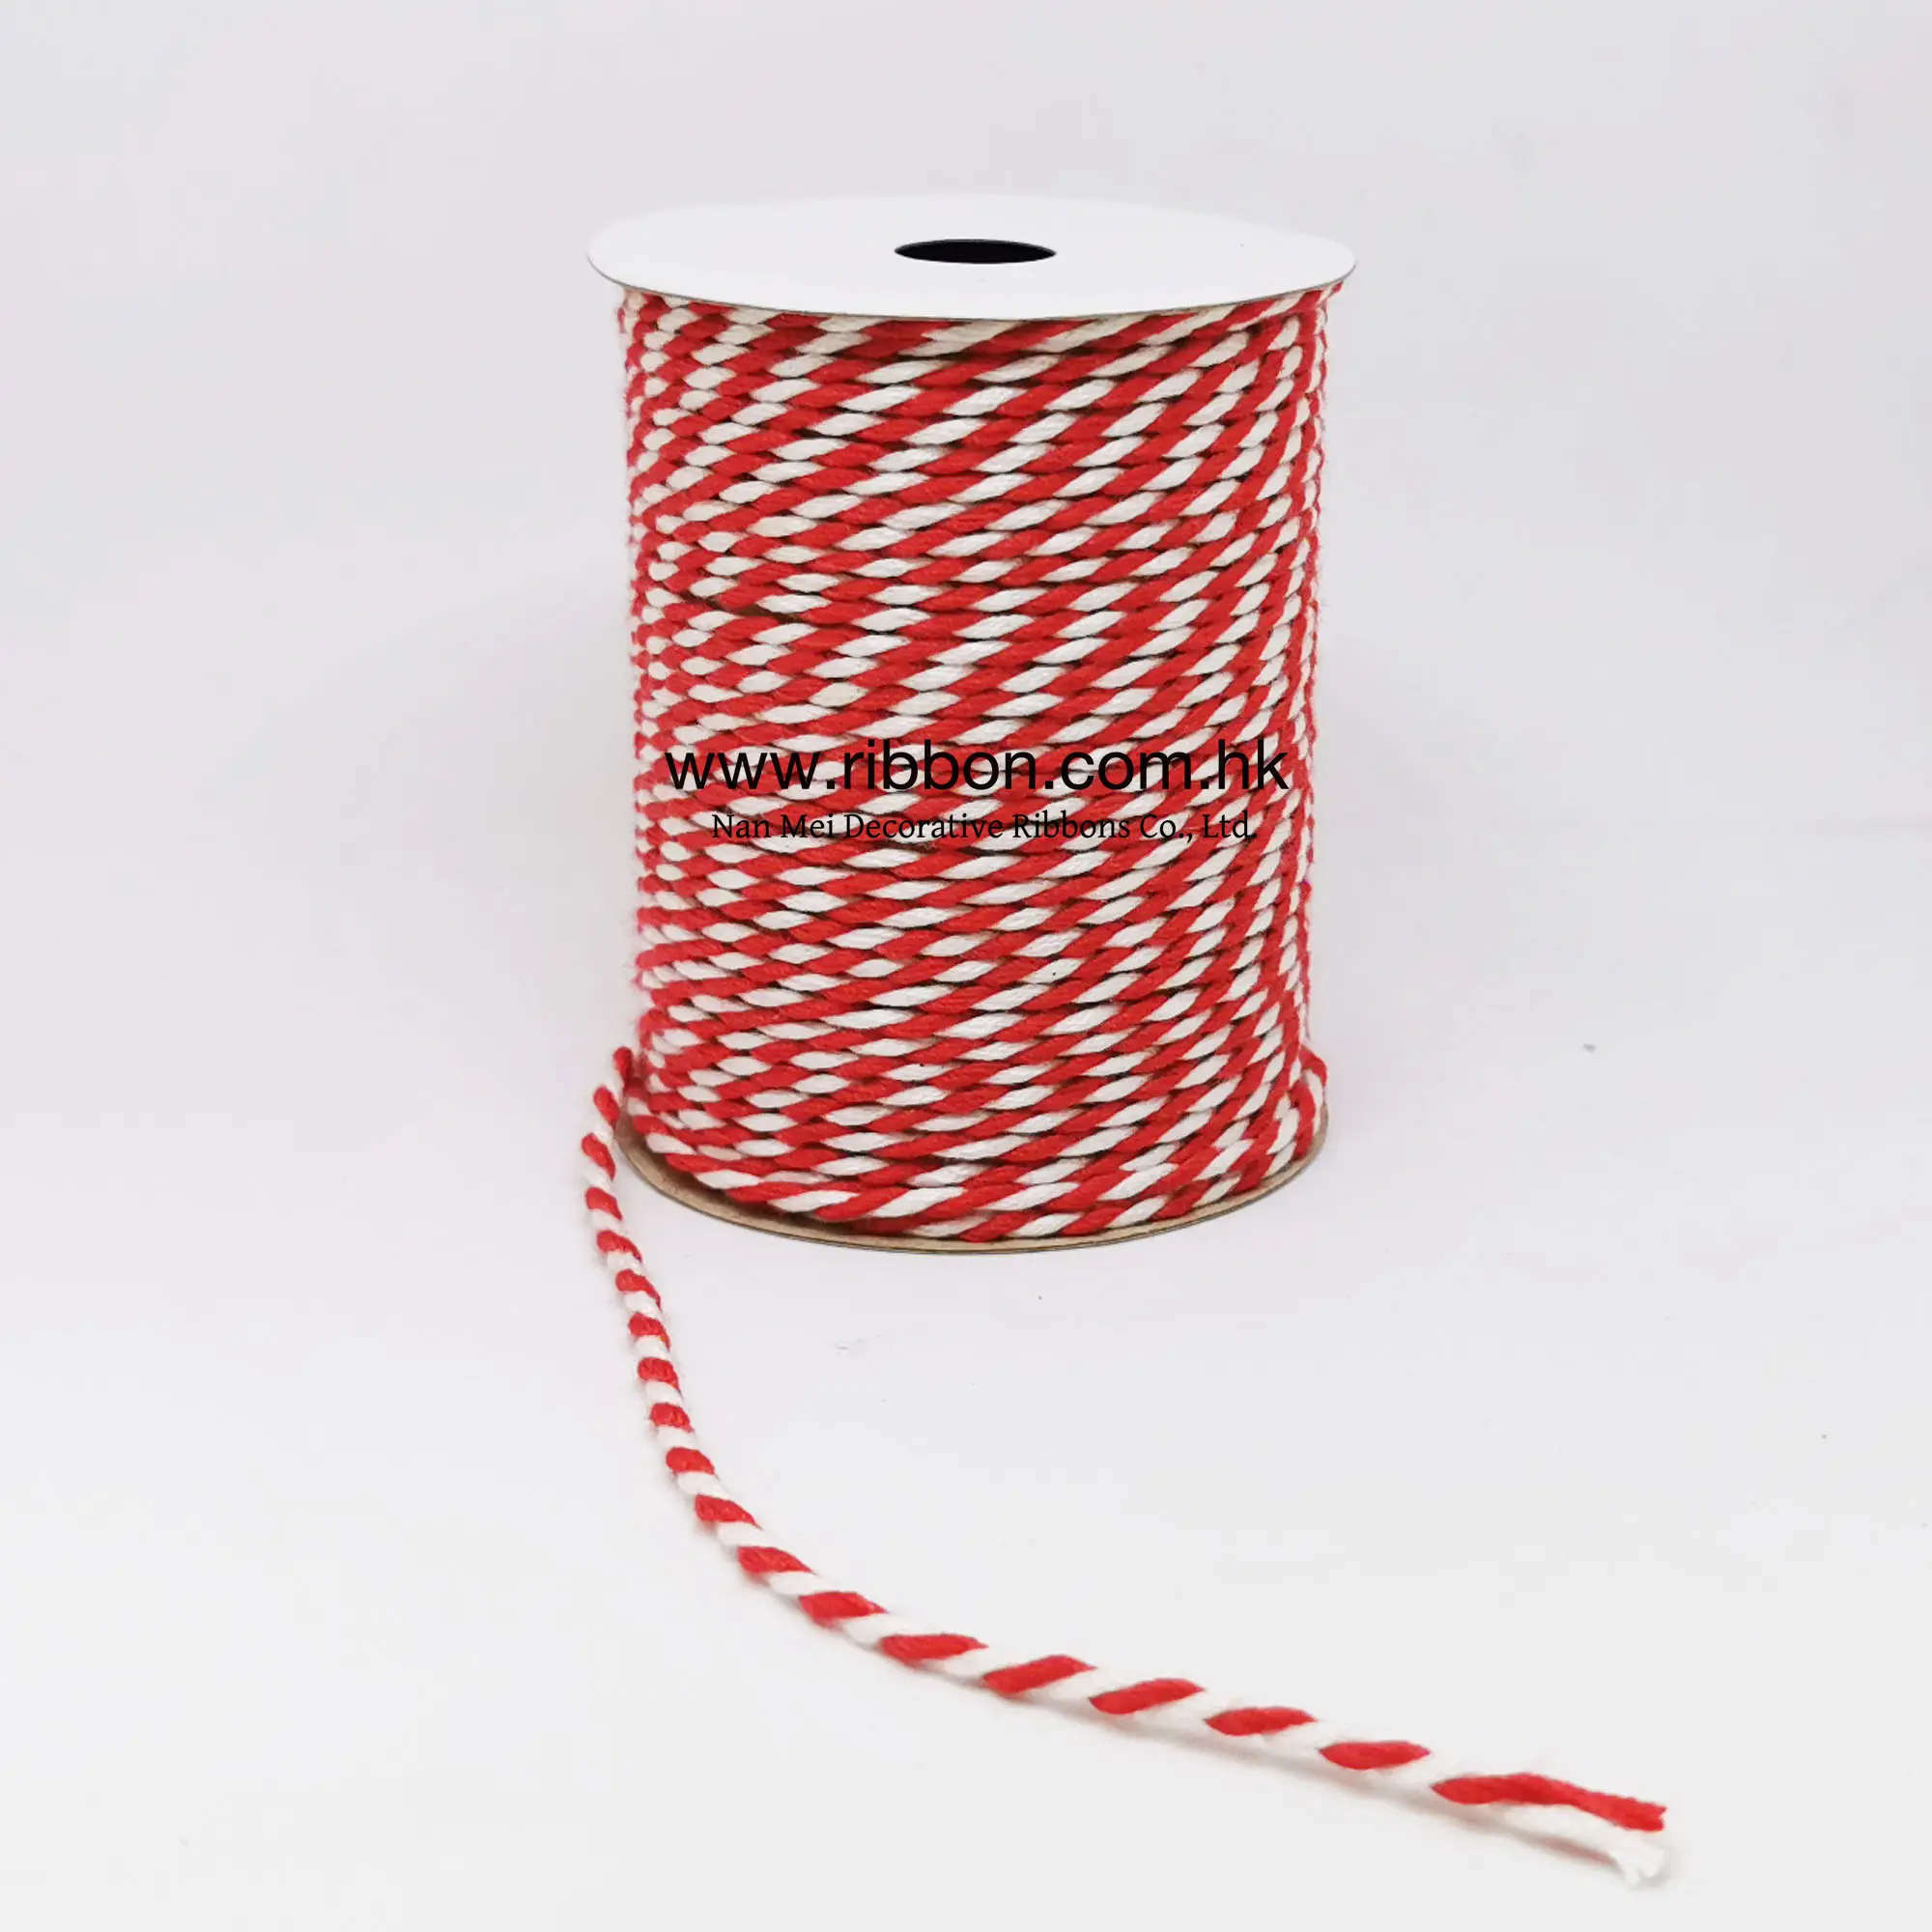 Cotton bakers twine 10m macrame craft red twine cotton string for gift